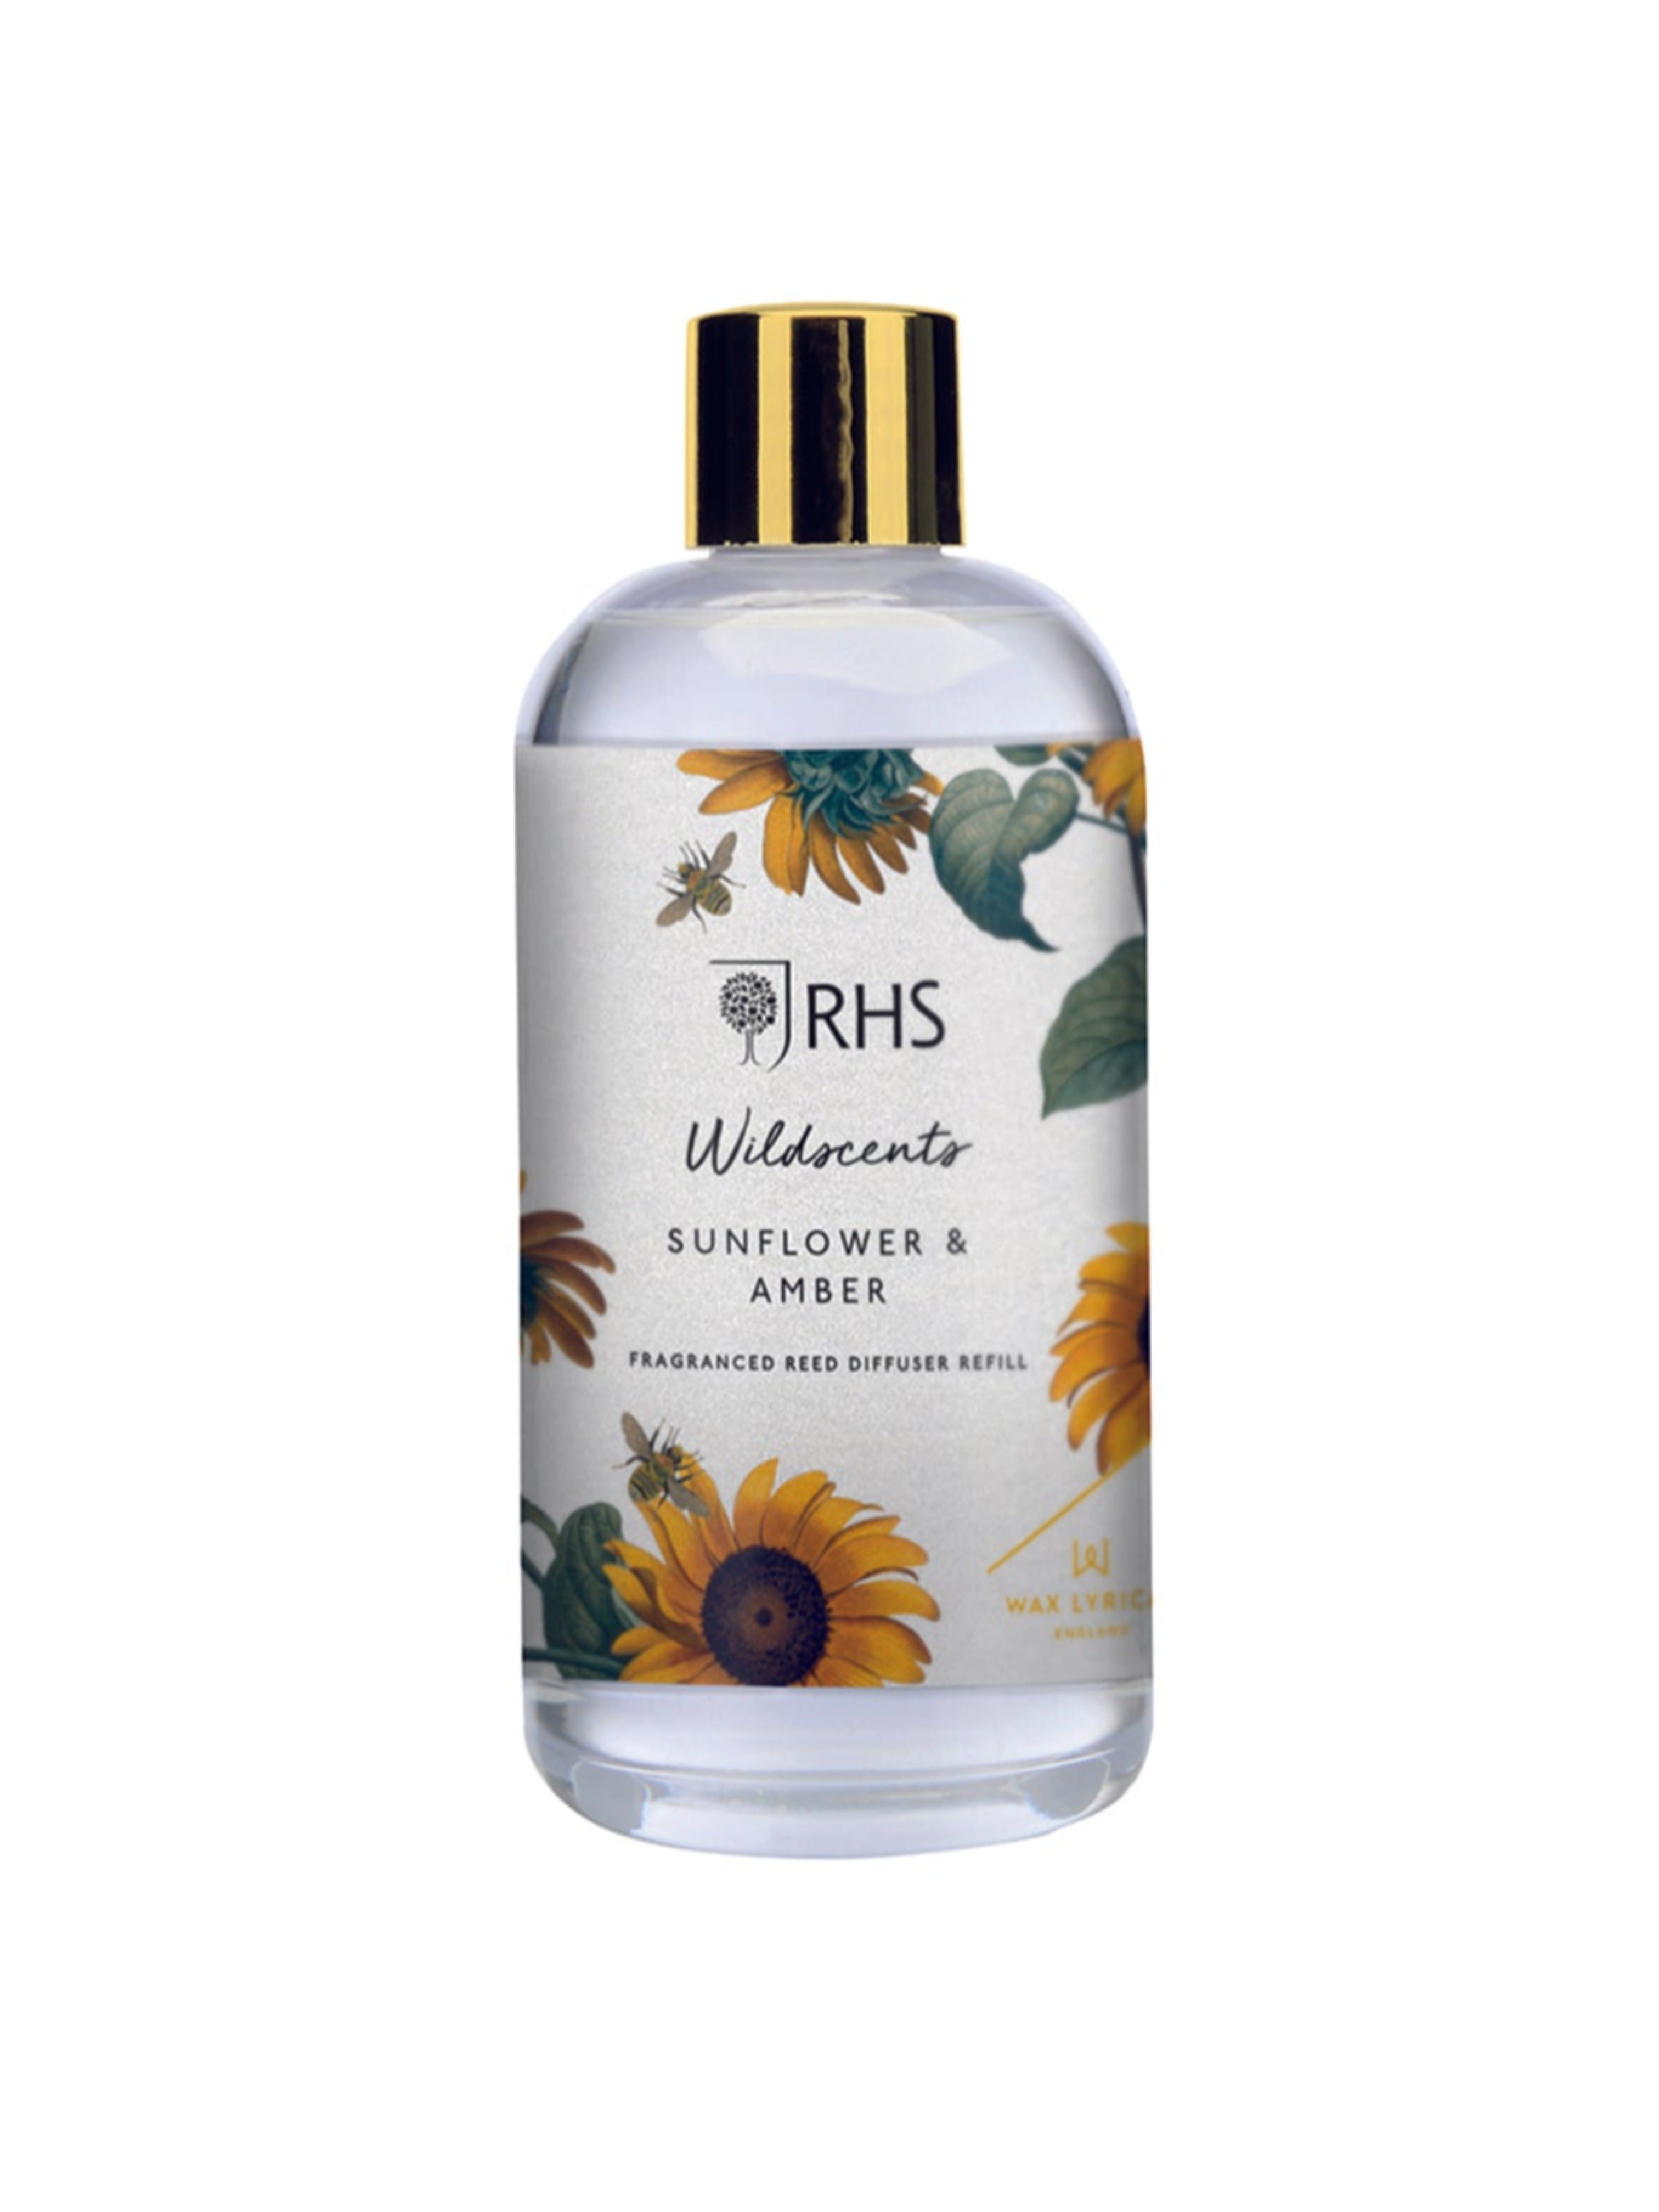 RHS Wildscents Sunflower and Amber  Diffuser Refill - 200ml